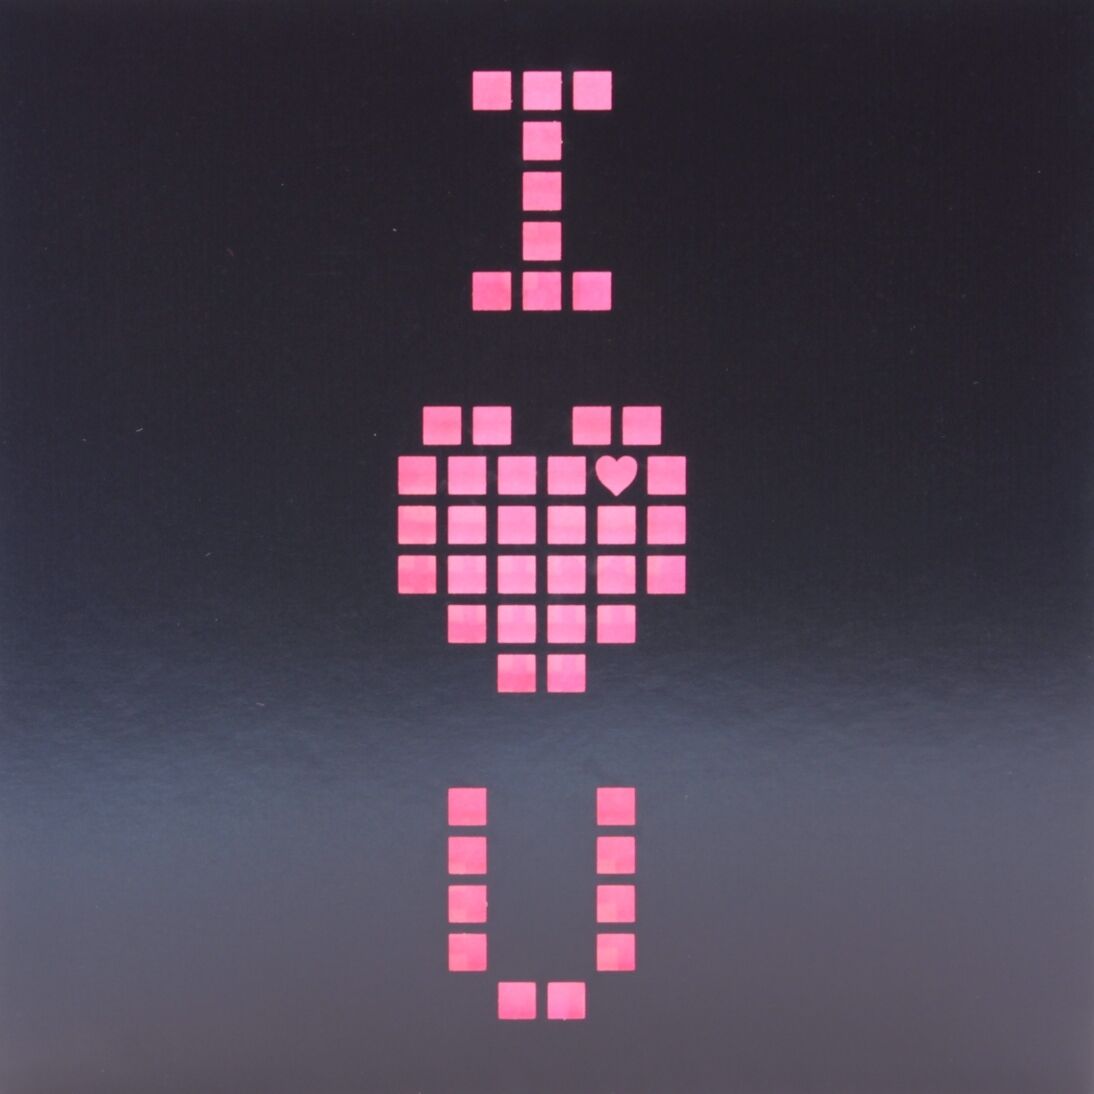 Laser Cut Card With Pink Pixel Design - Valentines, Birthday. Perfect for Geeks